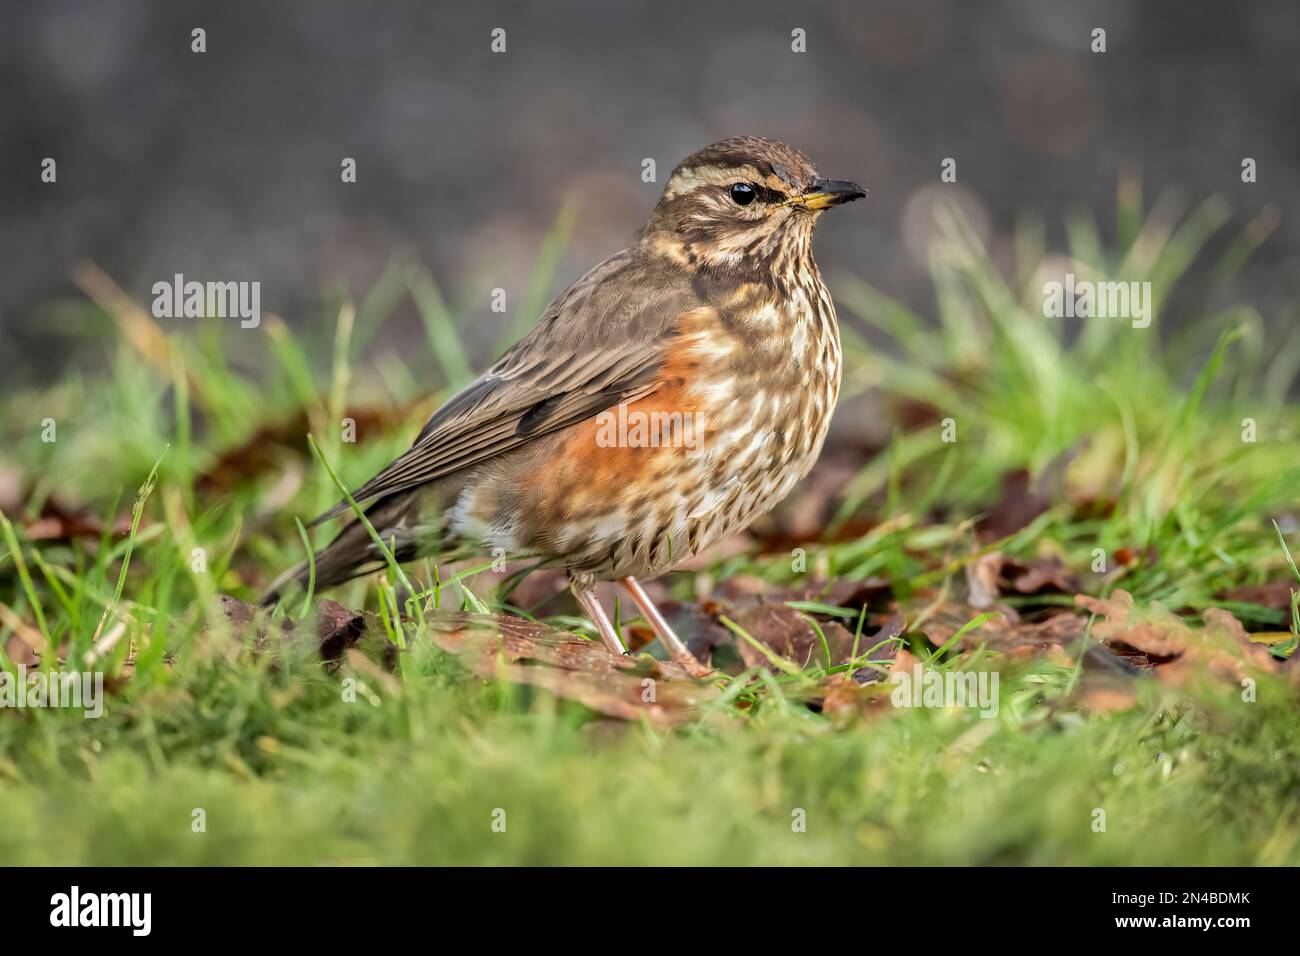 redstart, turdus iliacus, on the grass of a in a park in the winter in the uk Stock Photo